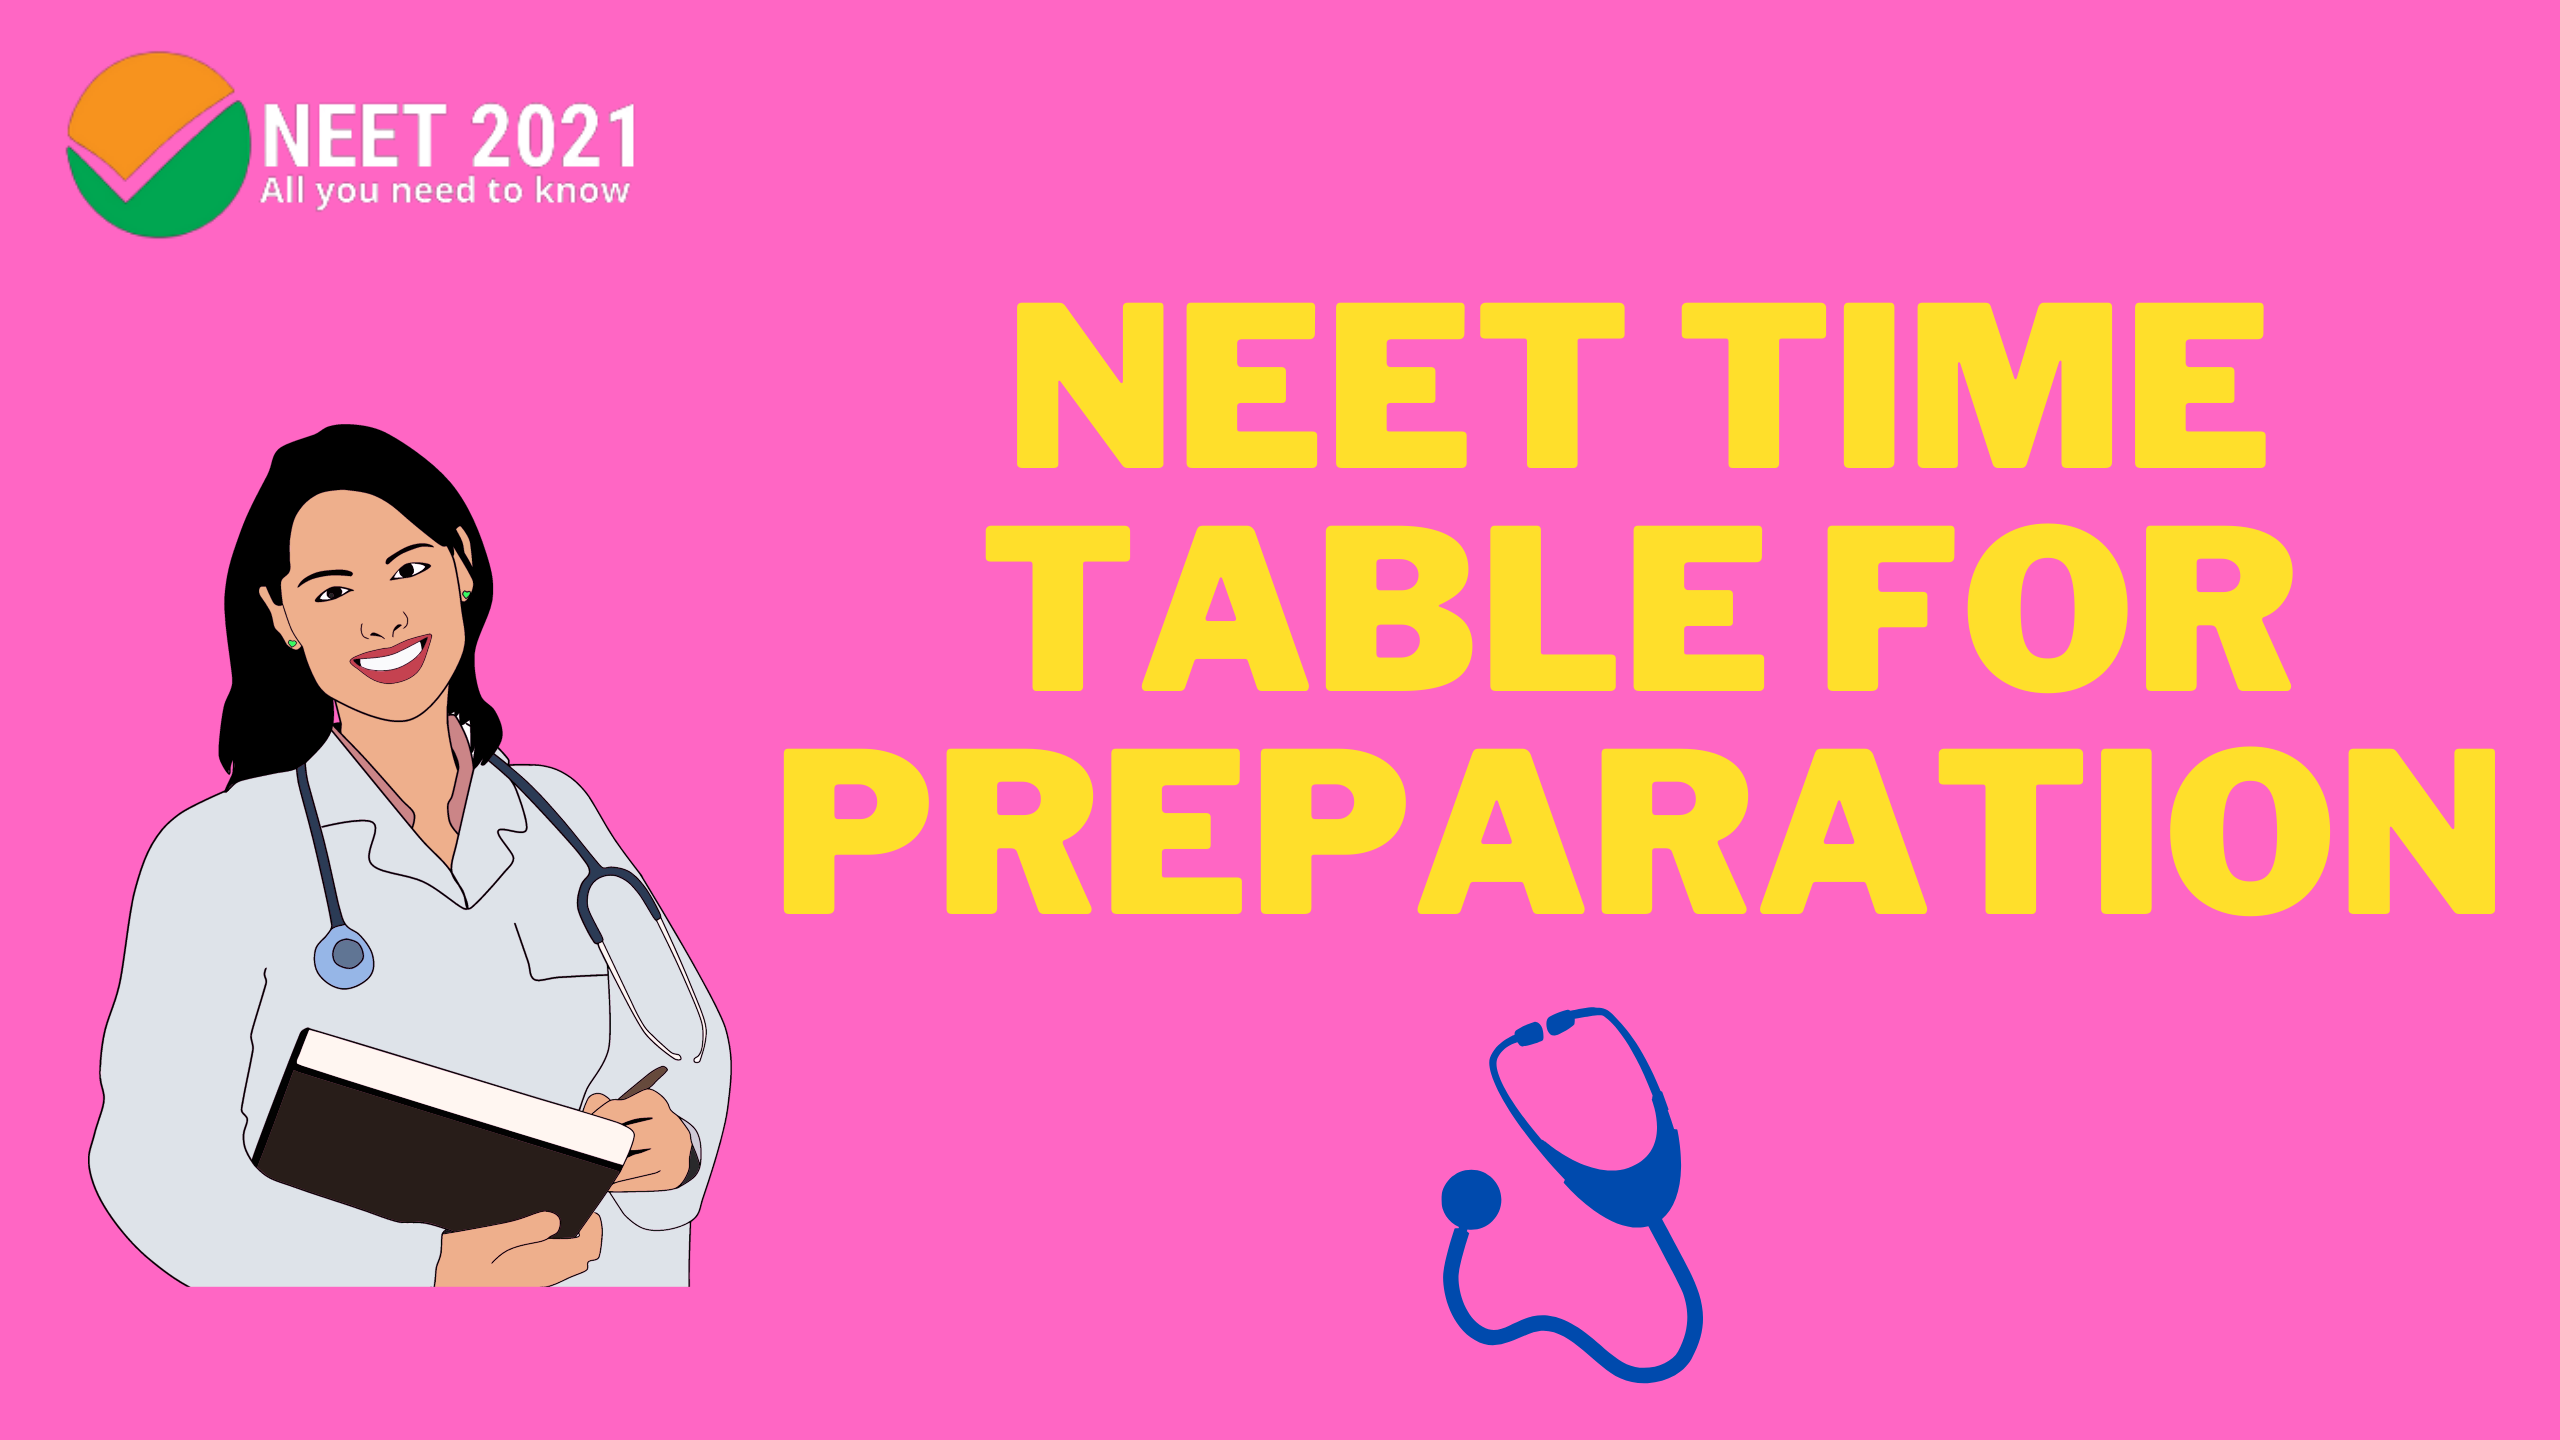 NEET Time Table for Preparation